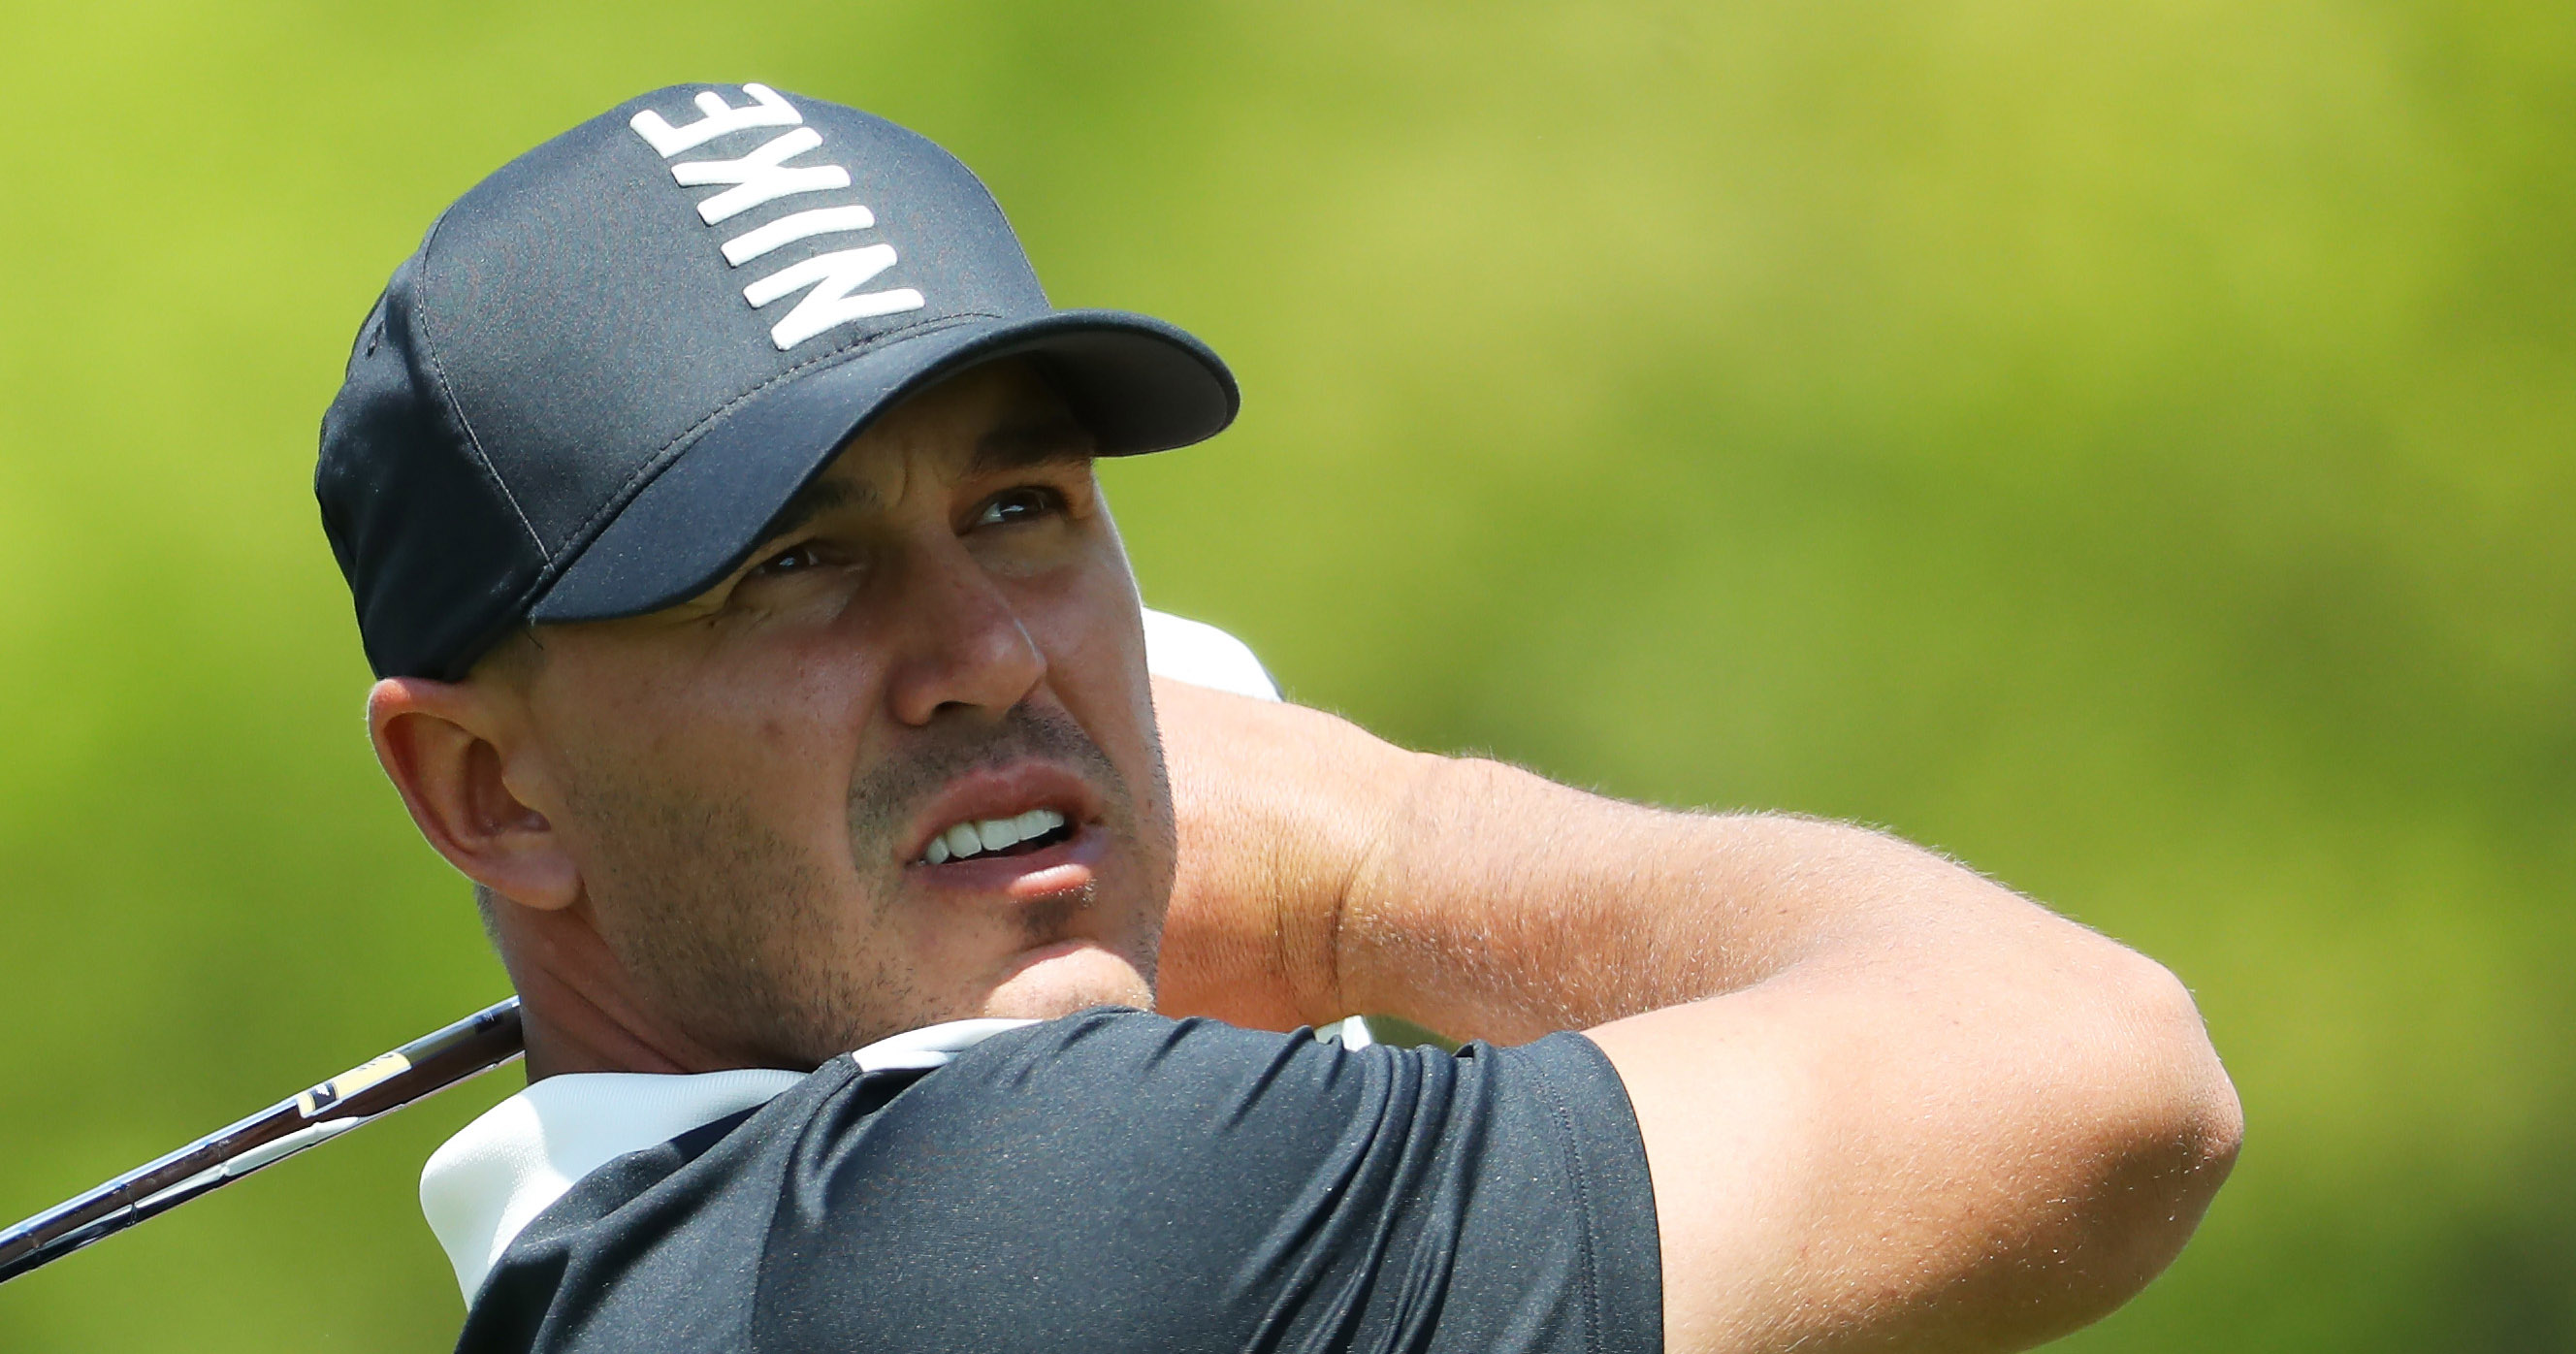 So Many Golf Fans Really DO NOT LIKE The New Nike Hats Players Are